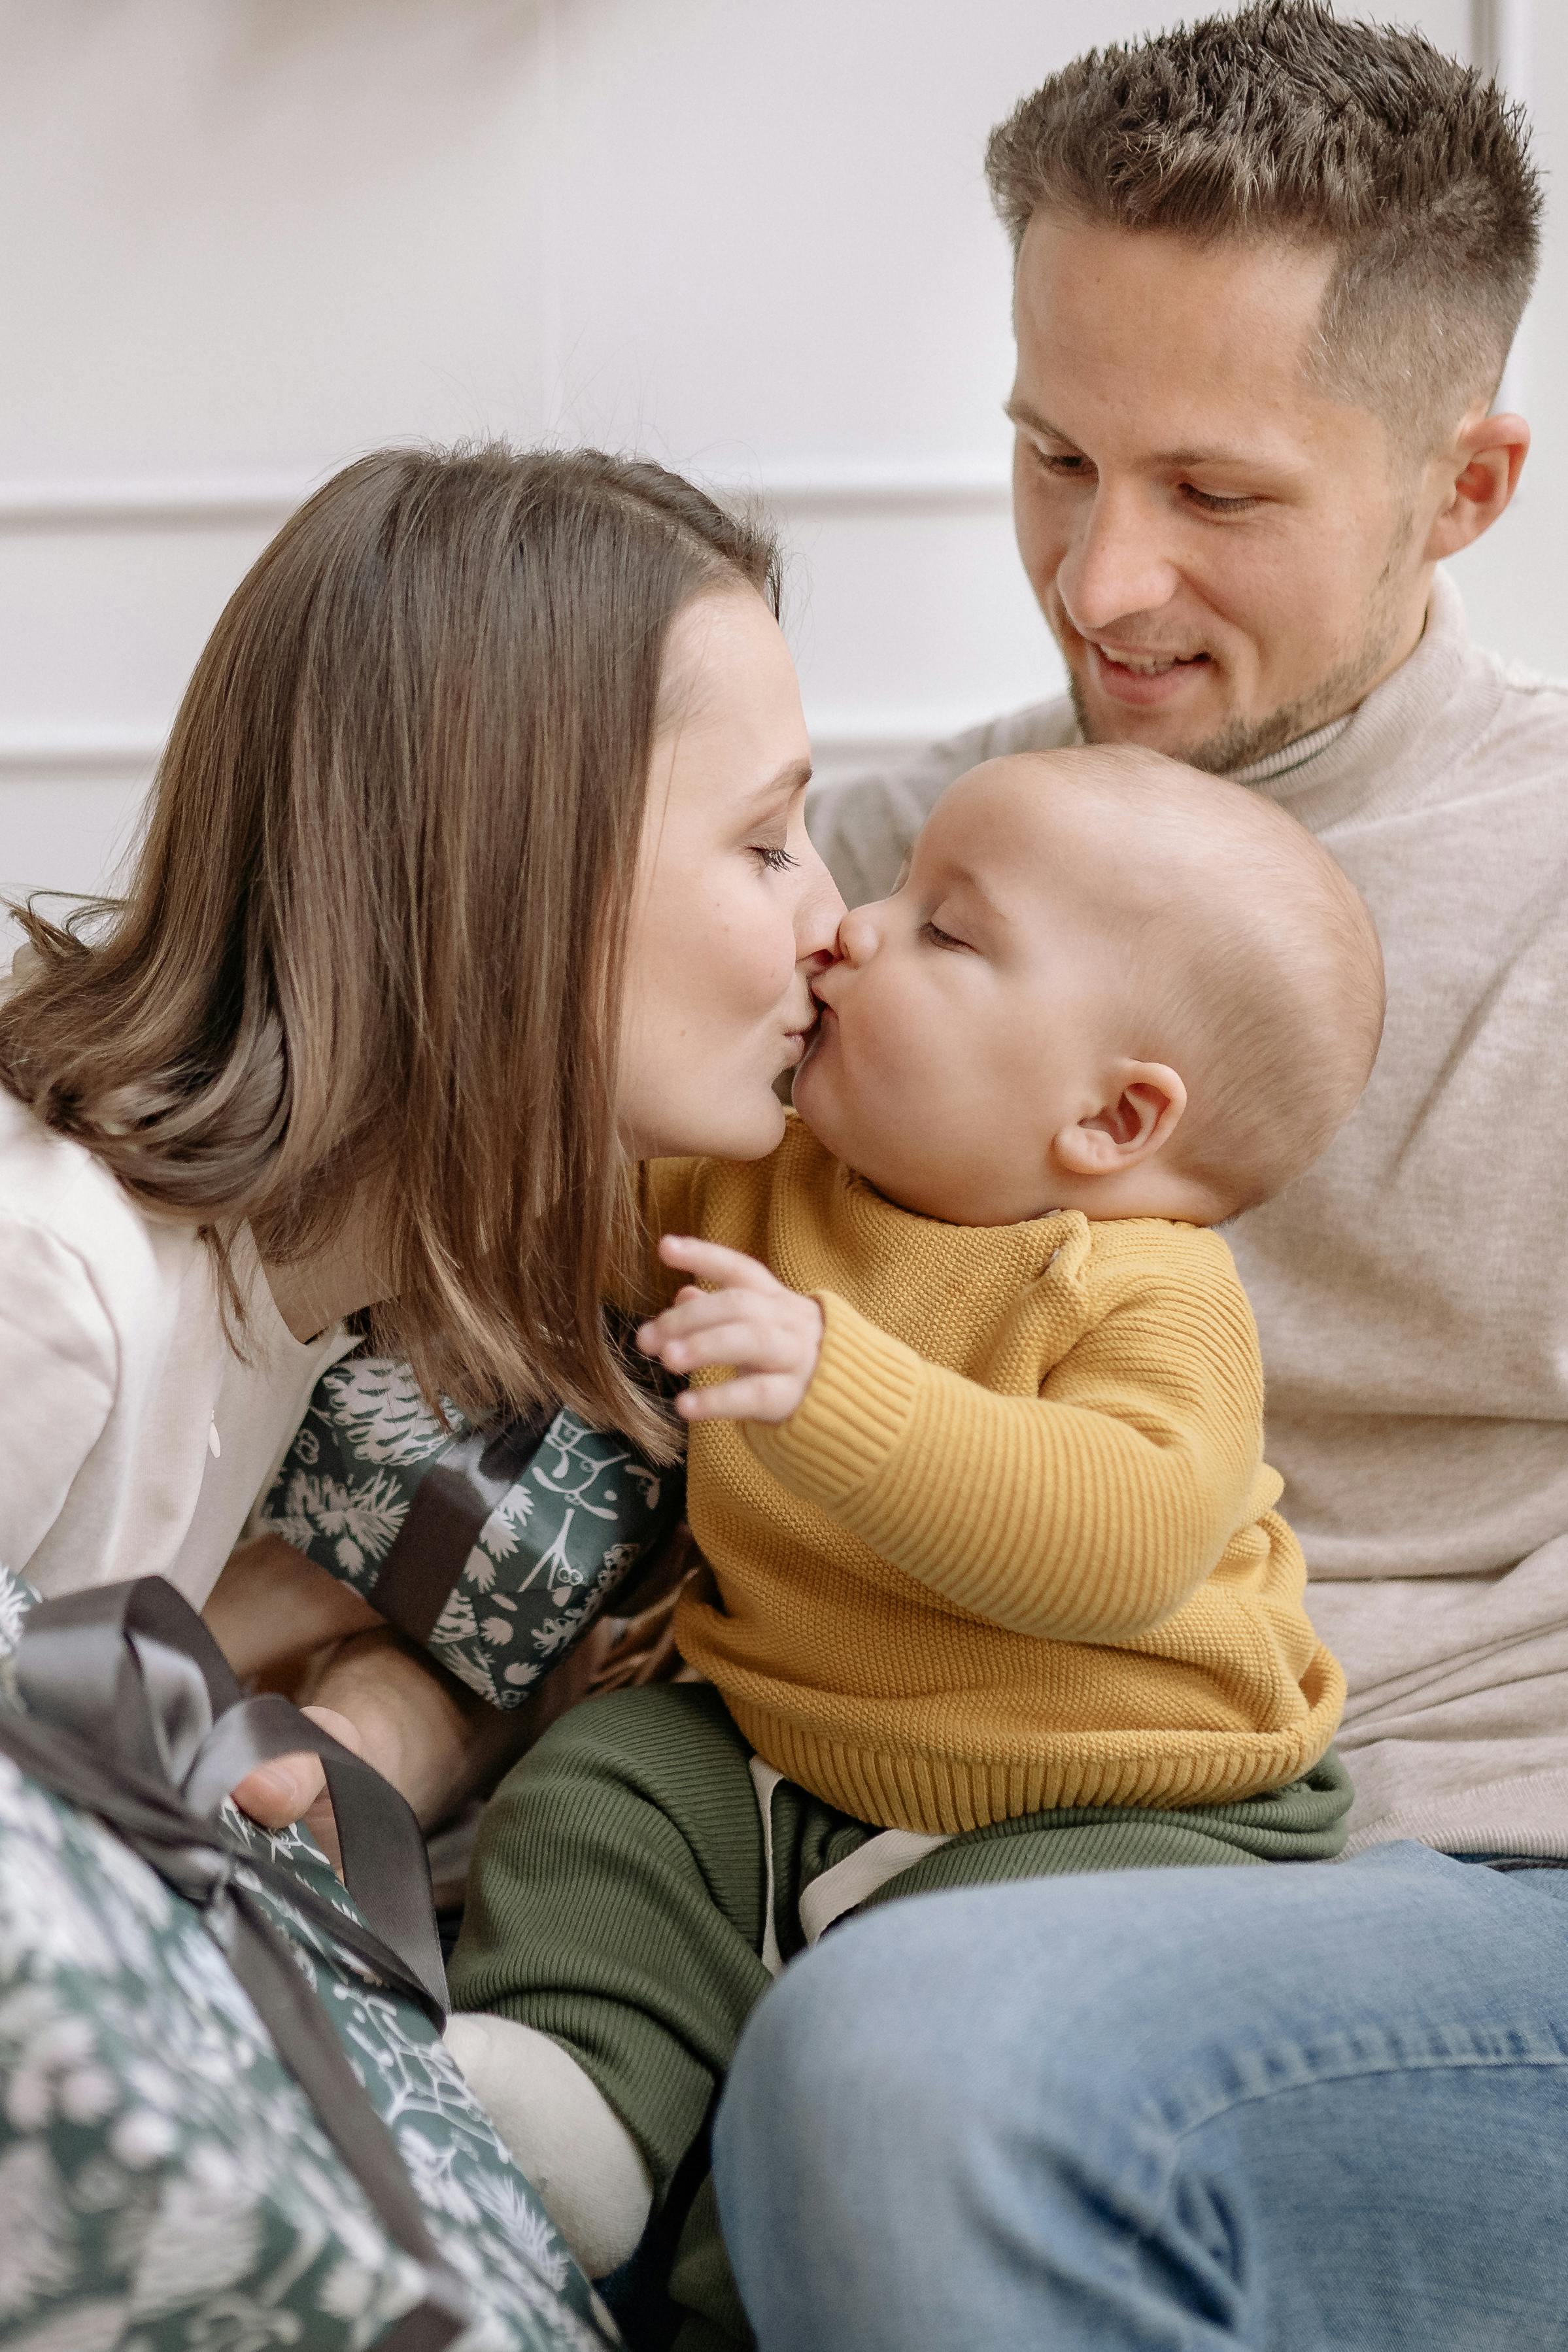 A mother kissing her baby as the father looks on | Source: Pexels